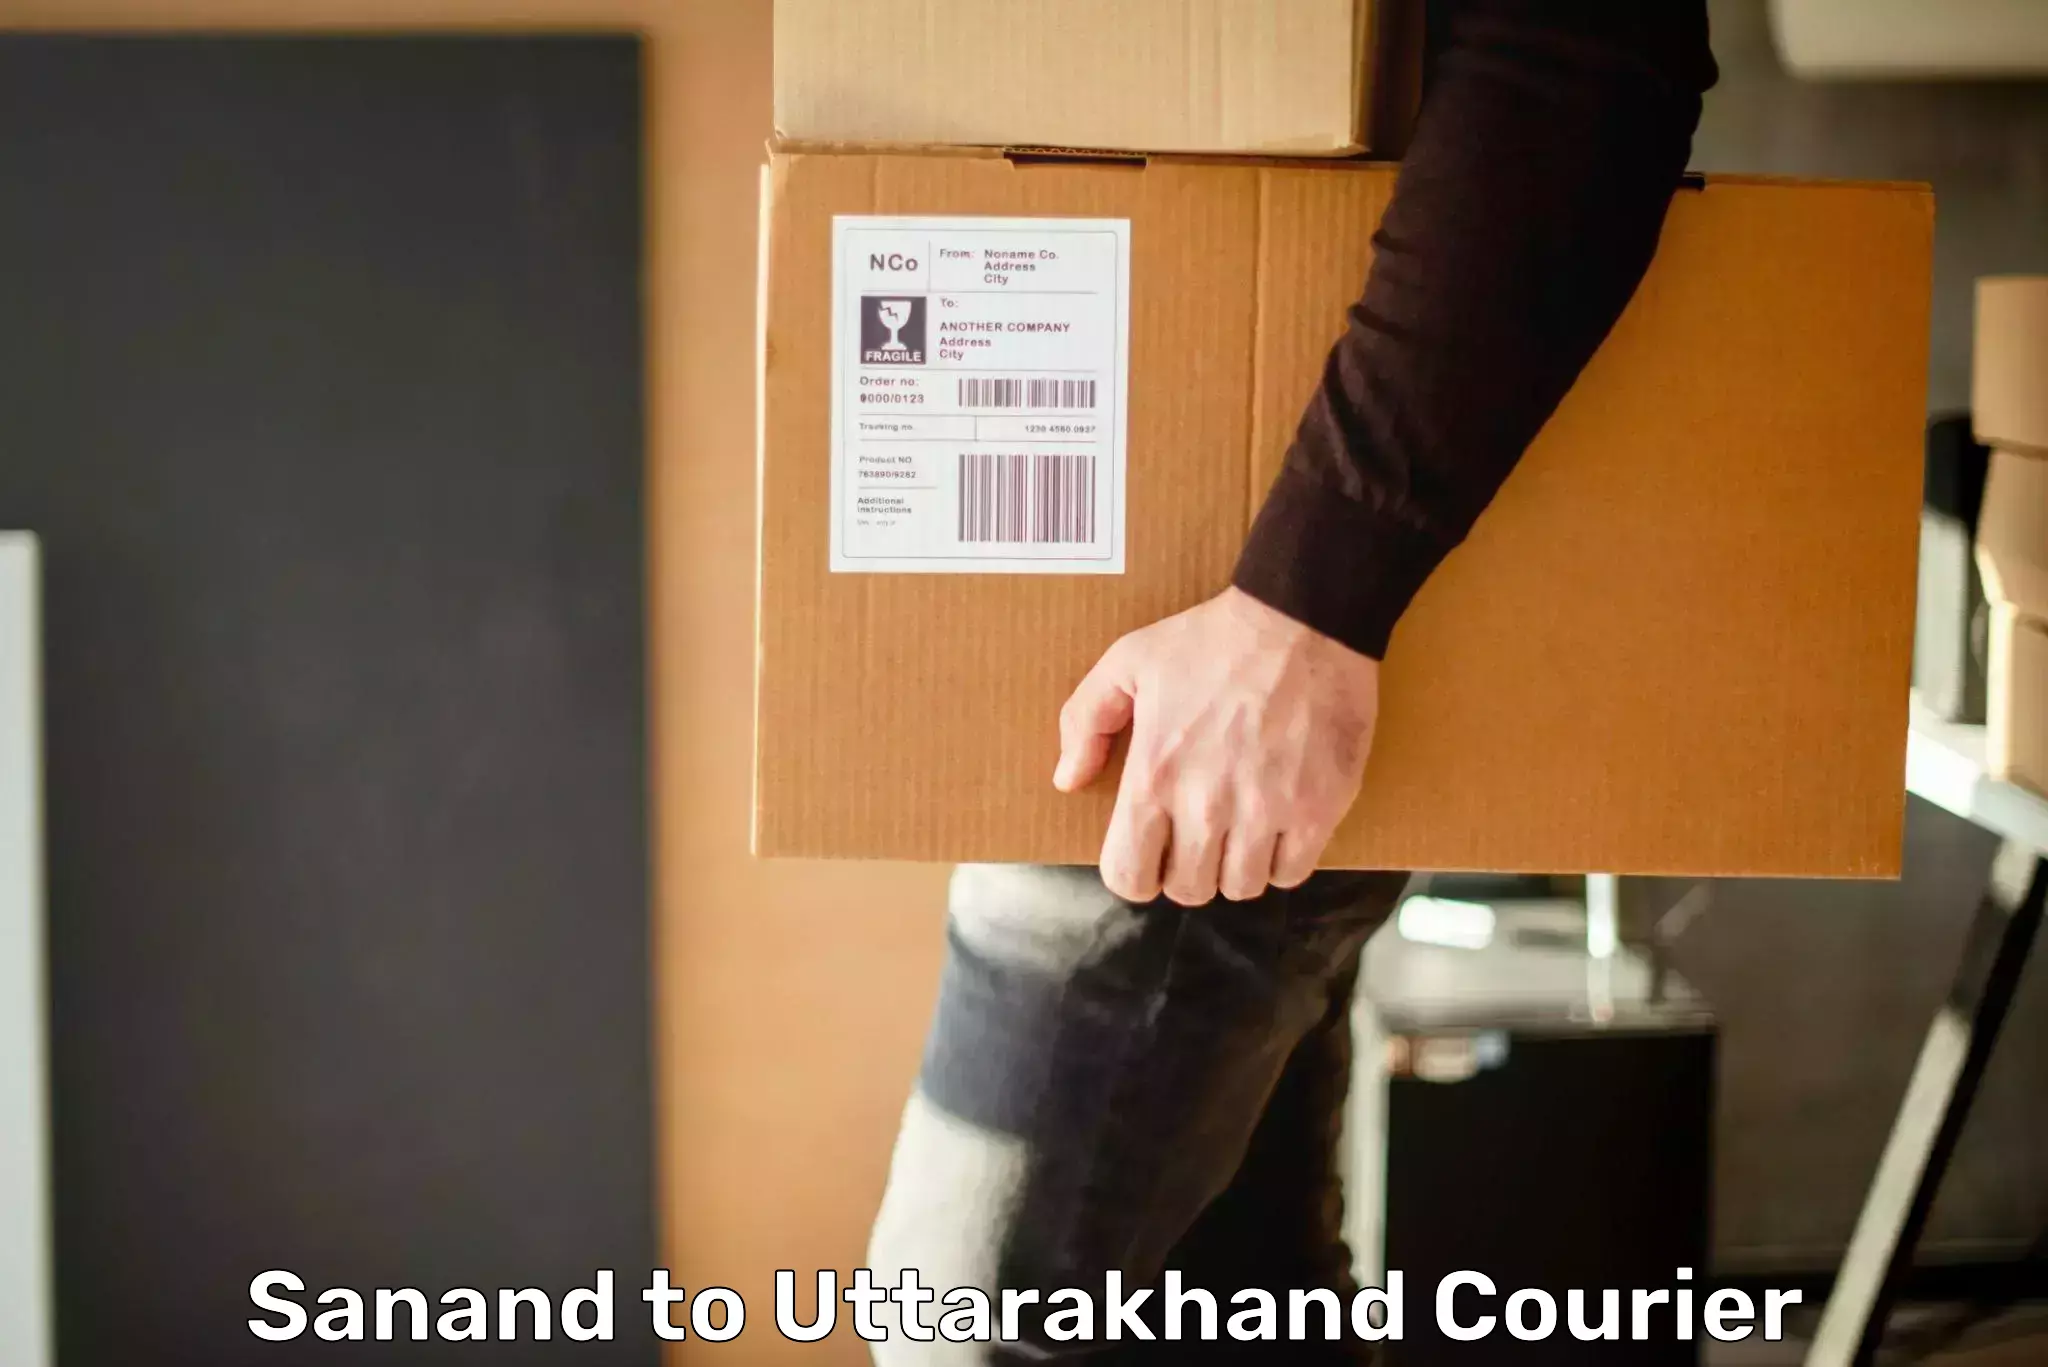 Specialized shipment handling Sanand to Bhagwanpur